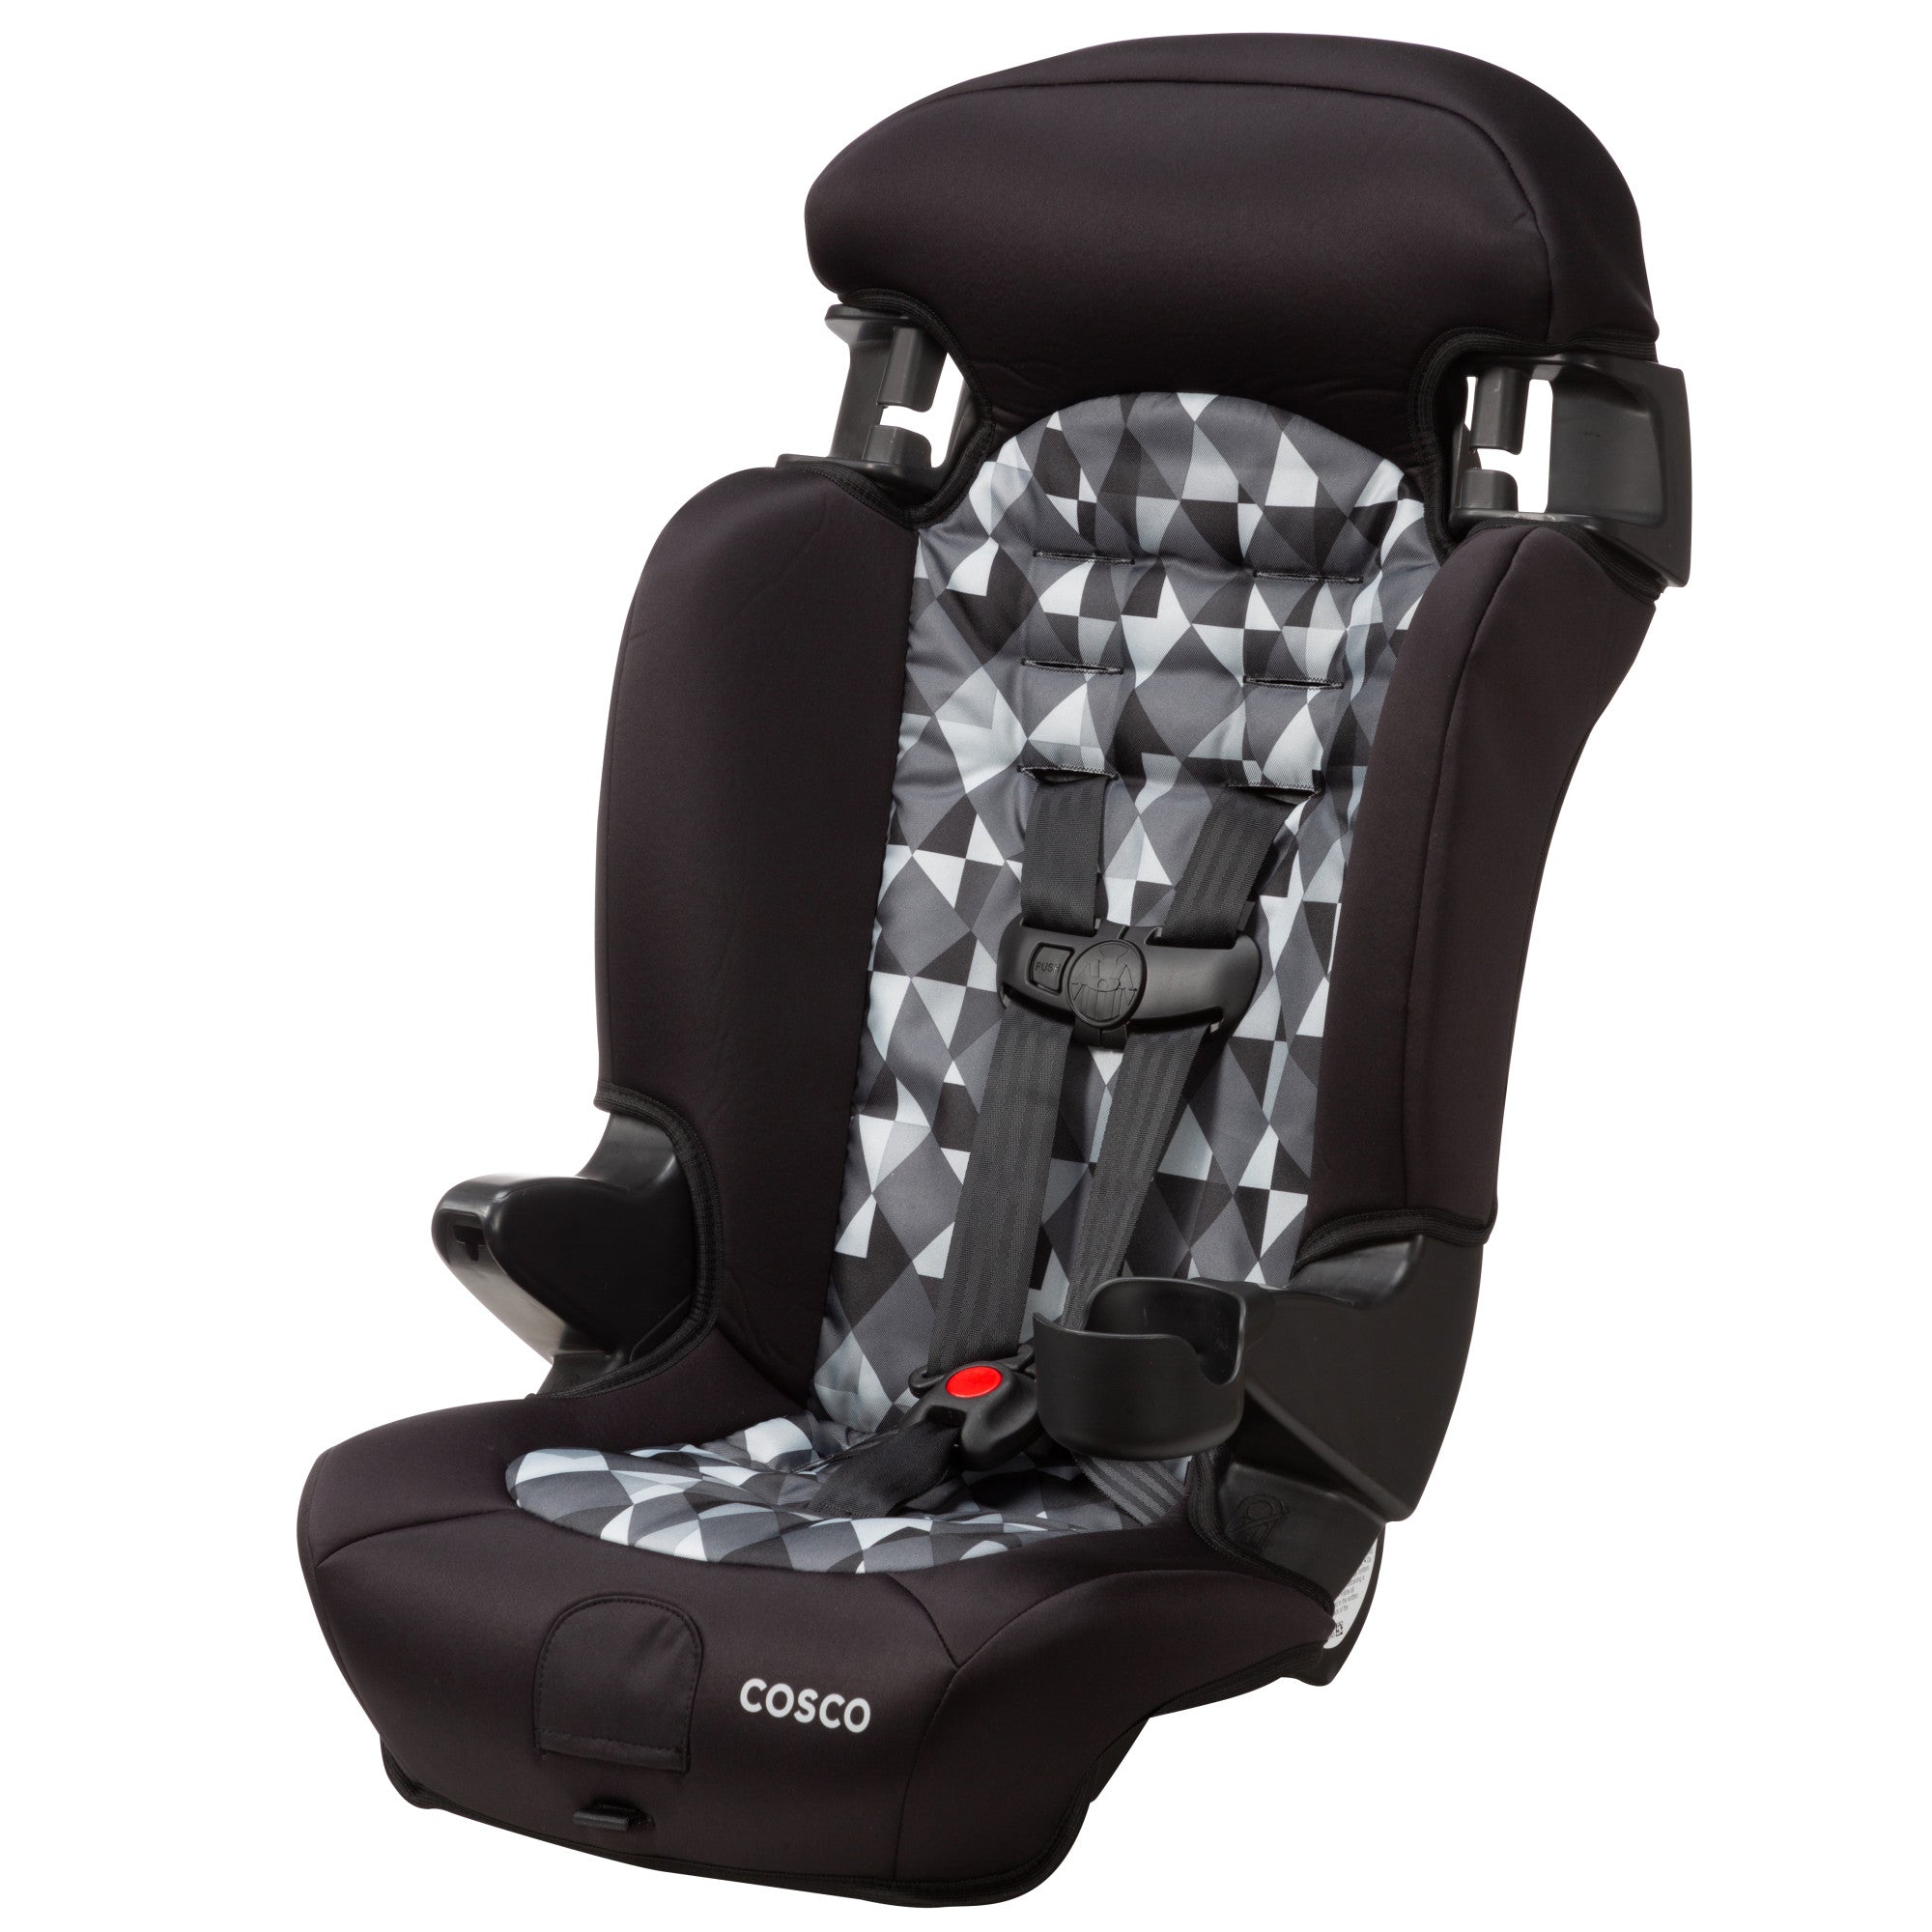 Cosco Finale 2-in-1 Booster Car Seat Storm Kite